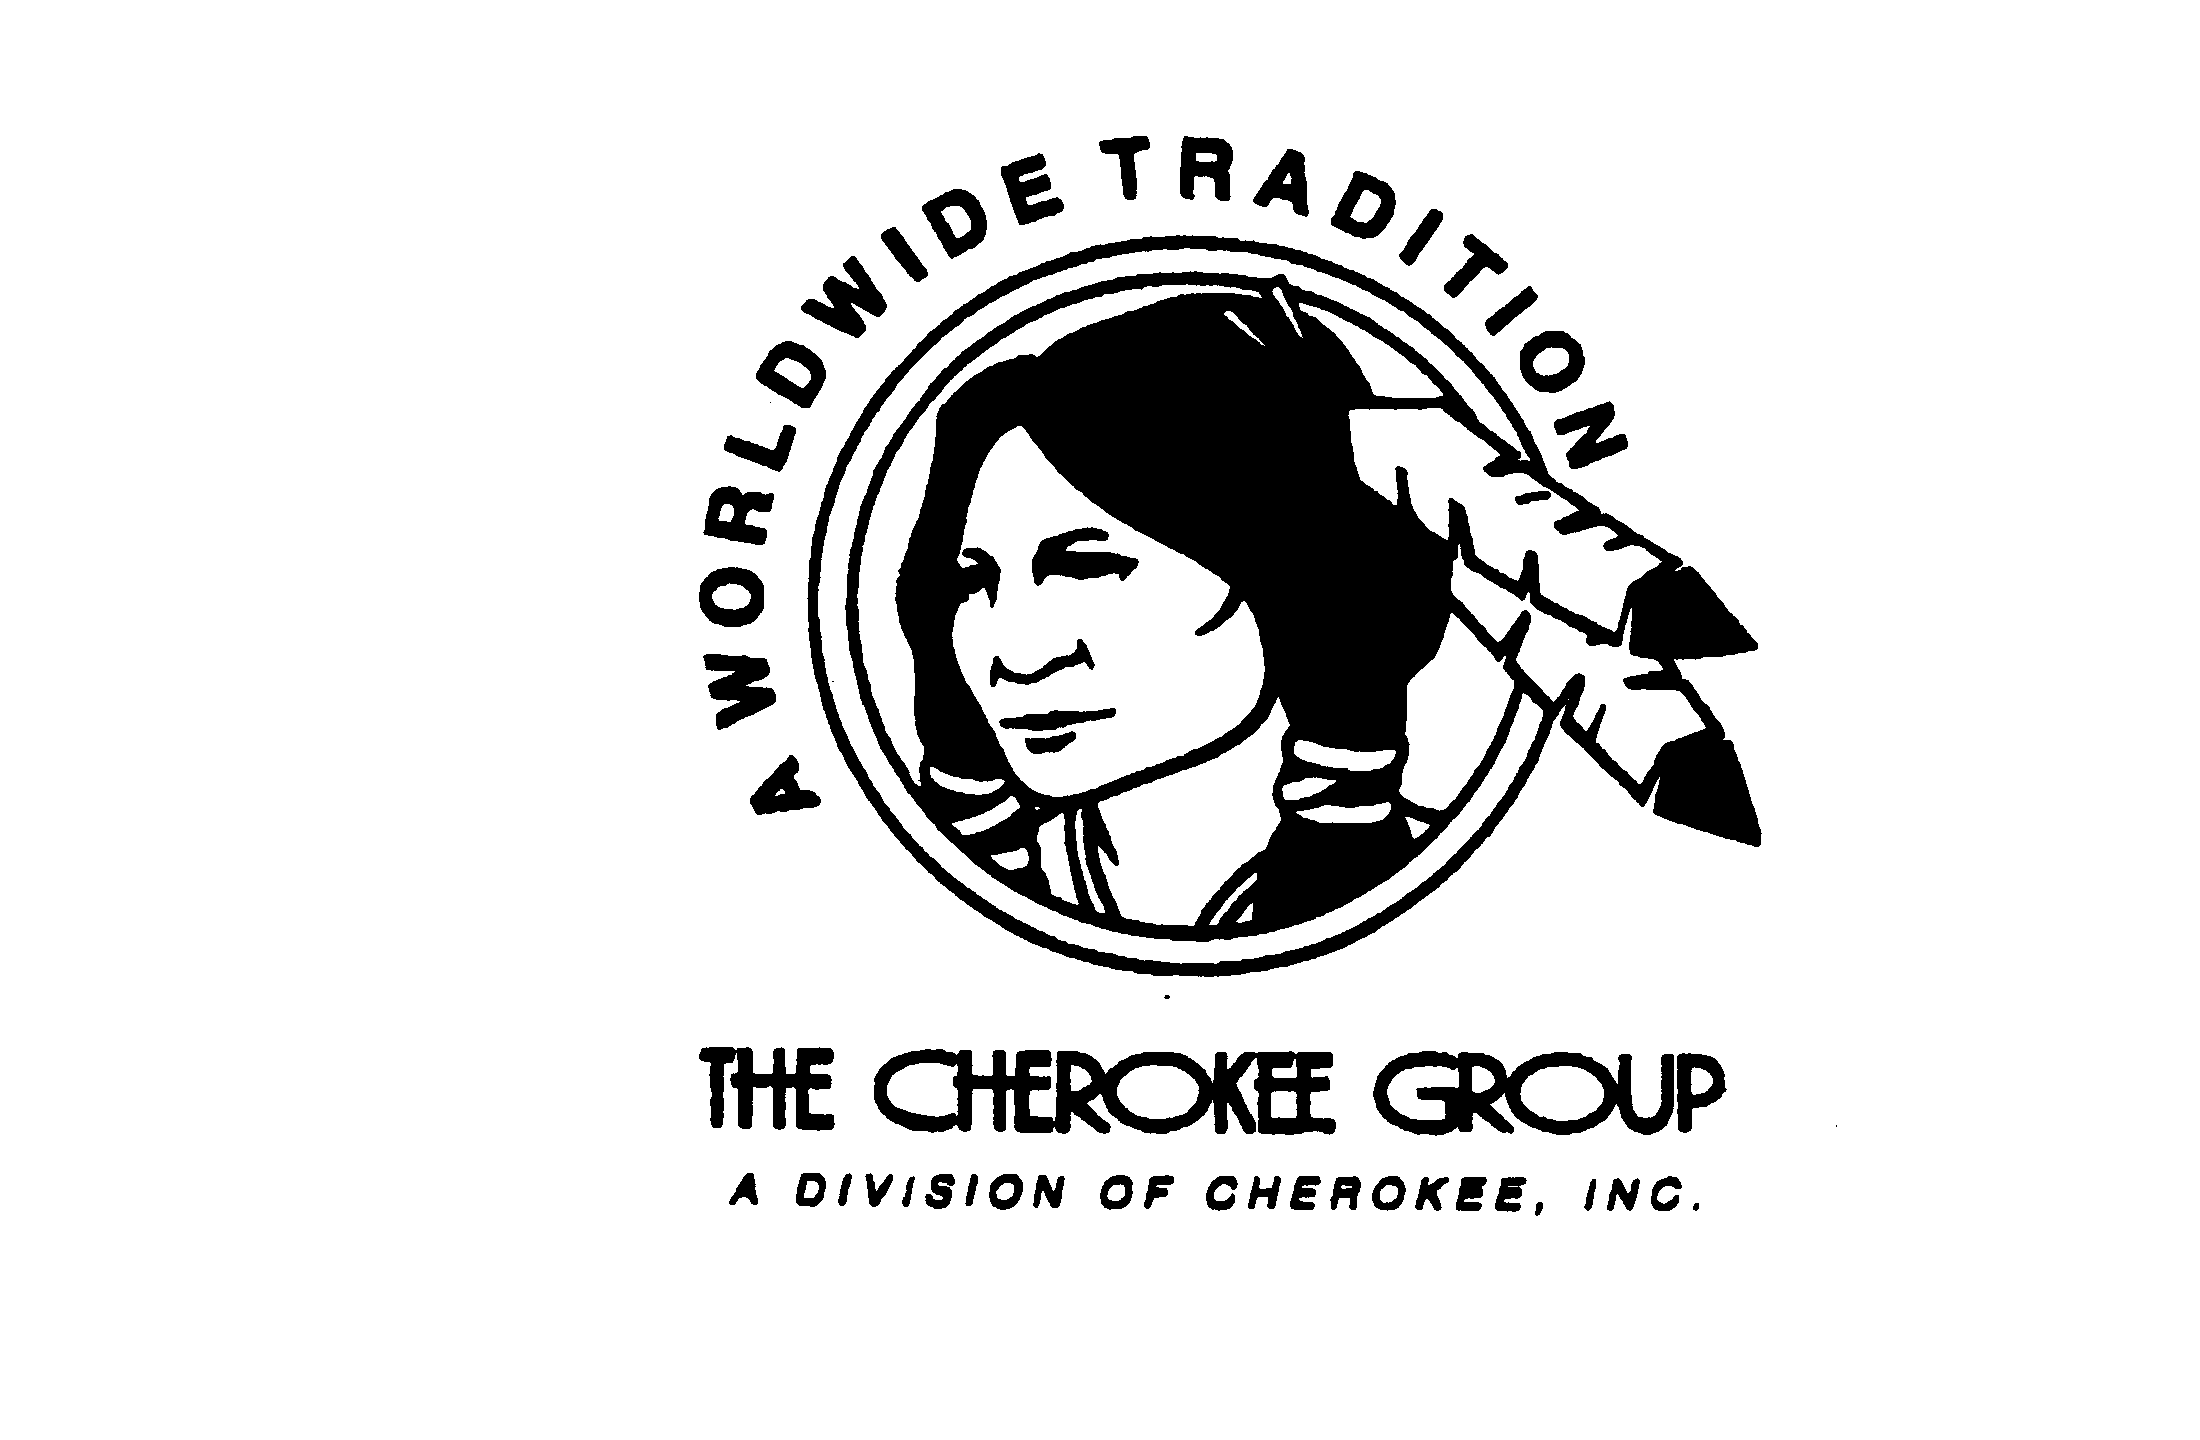  A WORLDWIDE TRADITION THE CHEROKEE GROUP A DIVISION OF CHEROKEE, INC.